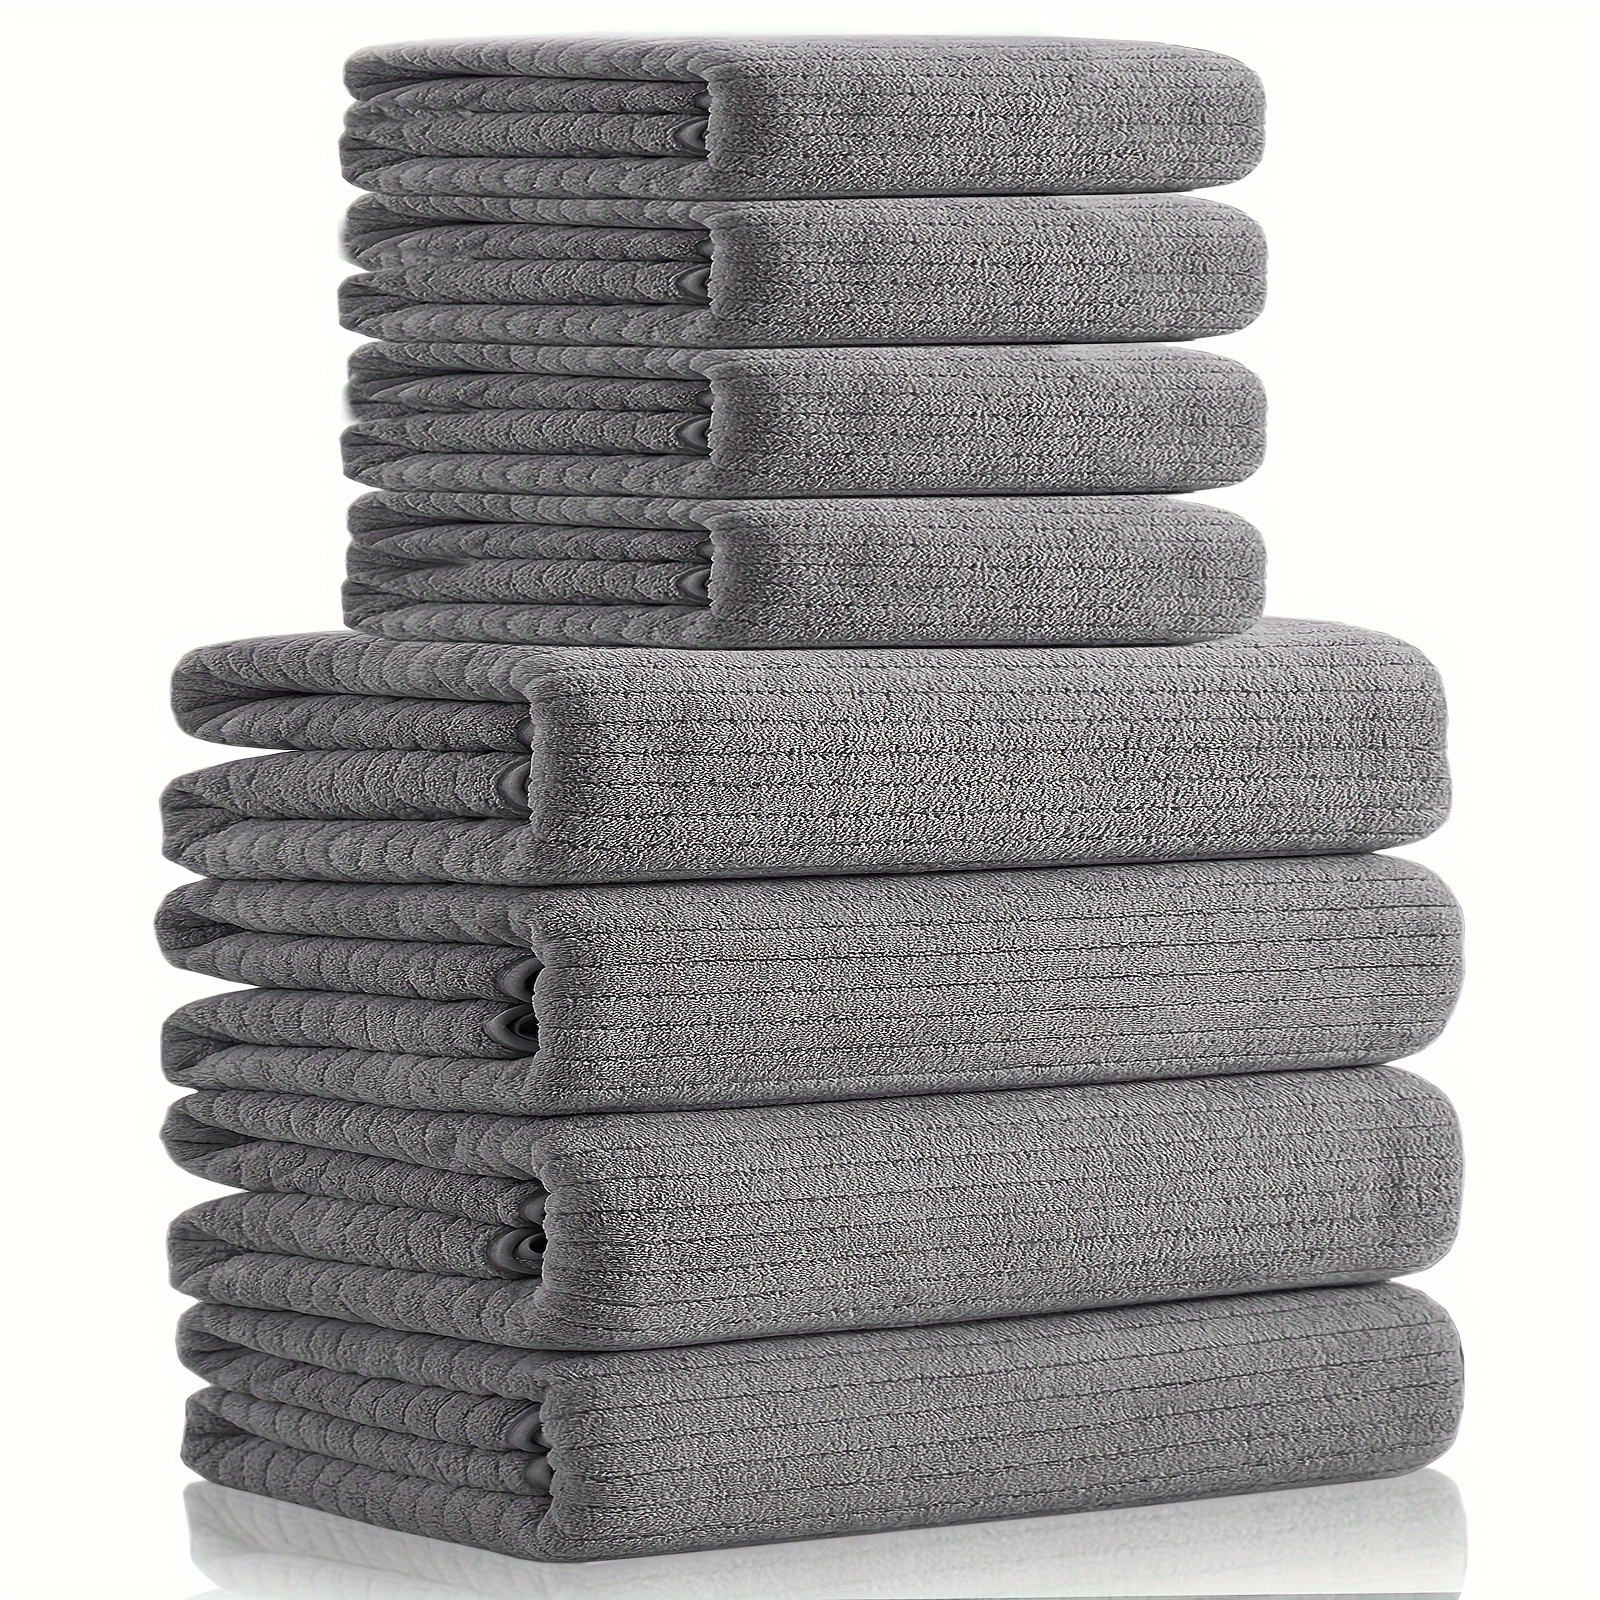 

8pcs Solid Color Towels Set, Bath Towels 28in*55in & Hand Towels 14in*30in, Super Soft Breathable Bathroom Towels, Highly Absorbent Shower Towel, For Beach Spa Gym Hotel, Bathroom Supplies